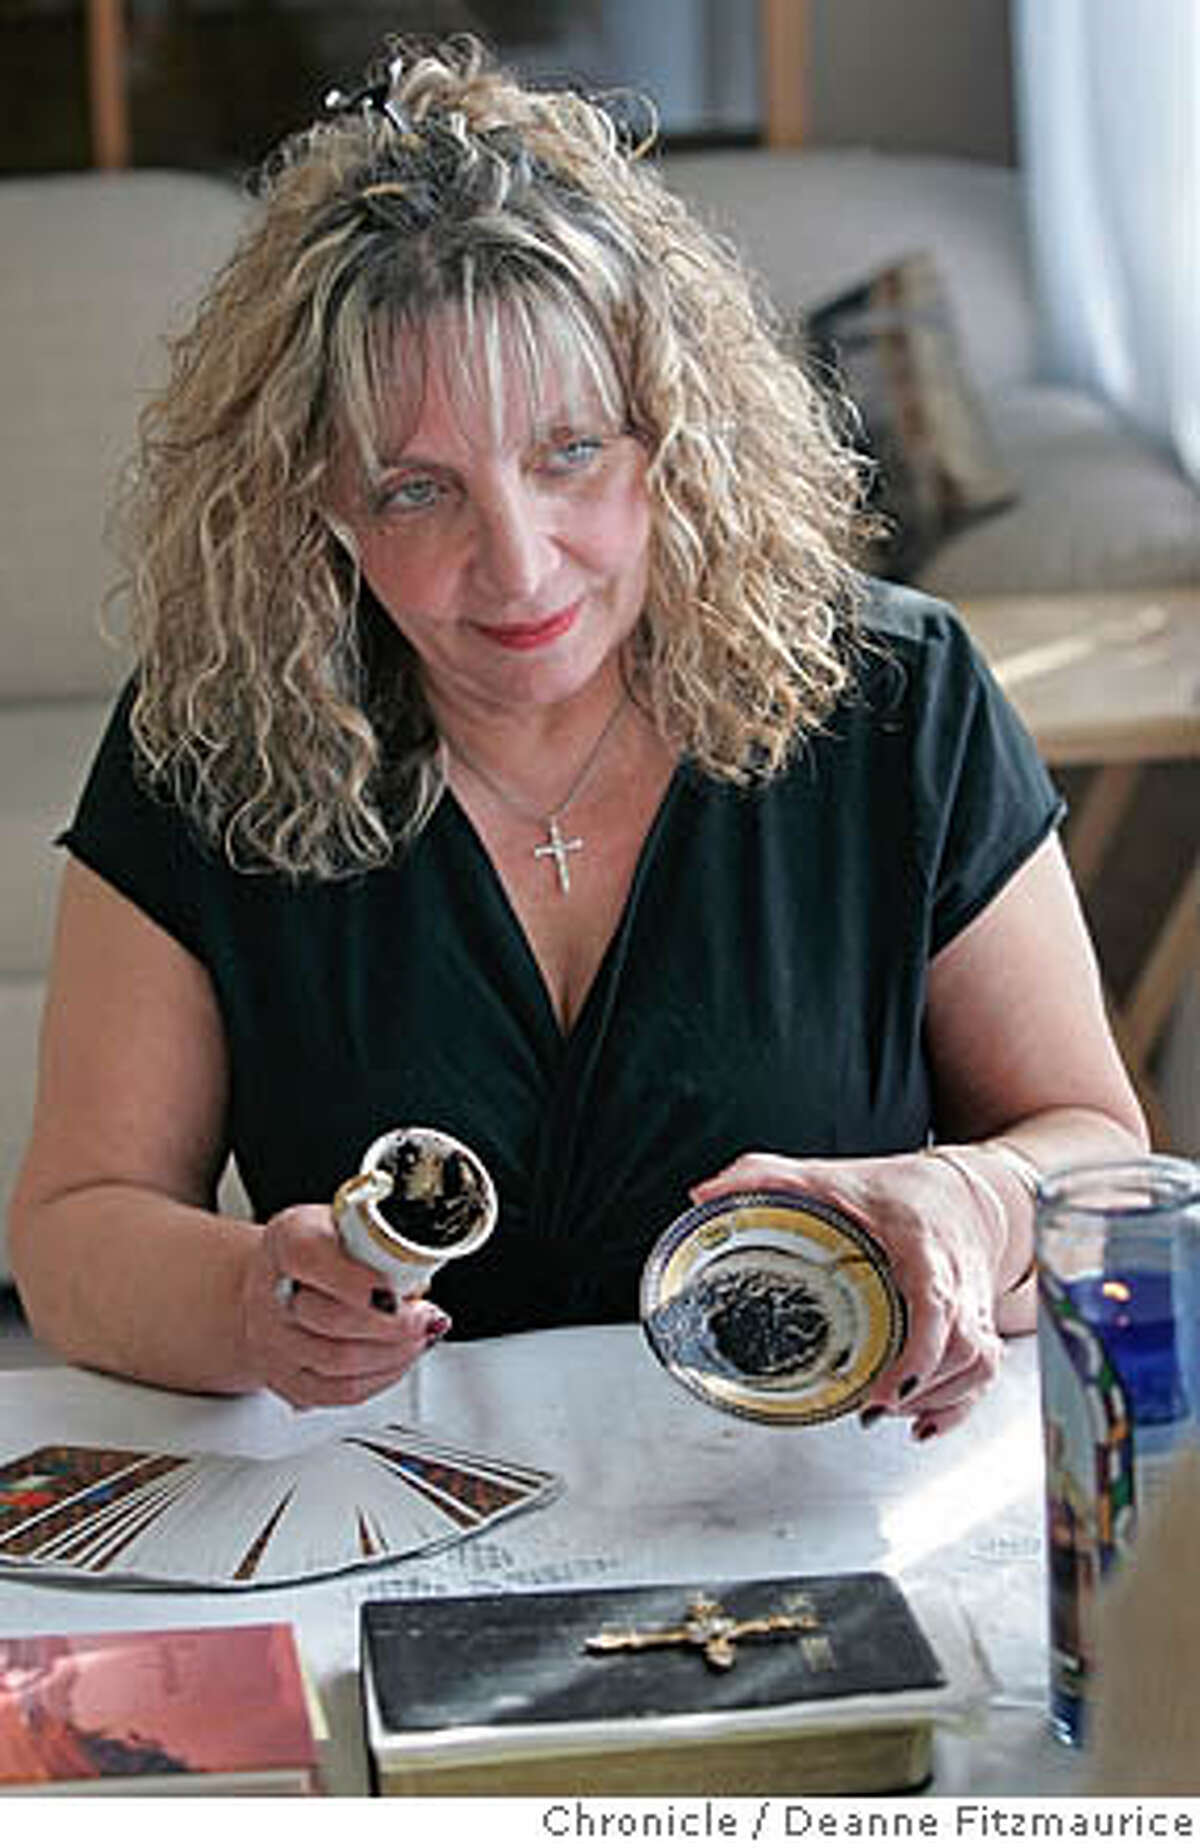 Artemis Donikian (cq) reads coffee grounds on a cup and saucer to tell fortunes in her Burlingame home. Event in Burlingame on 12/16/05. Deanne Fitzmaurice / The Chronicle